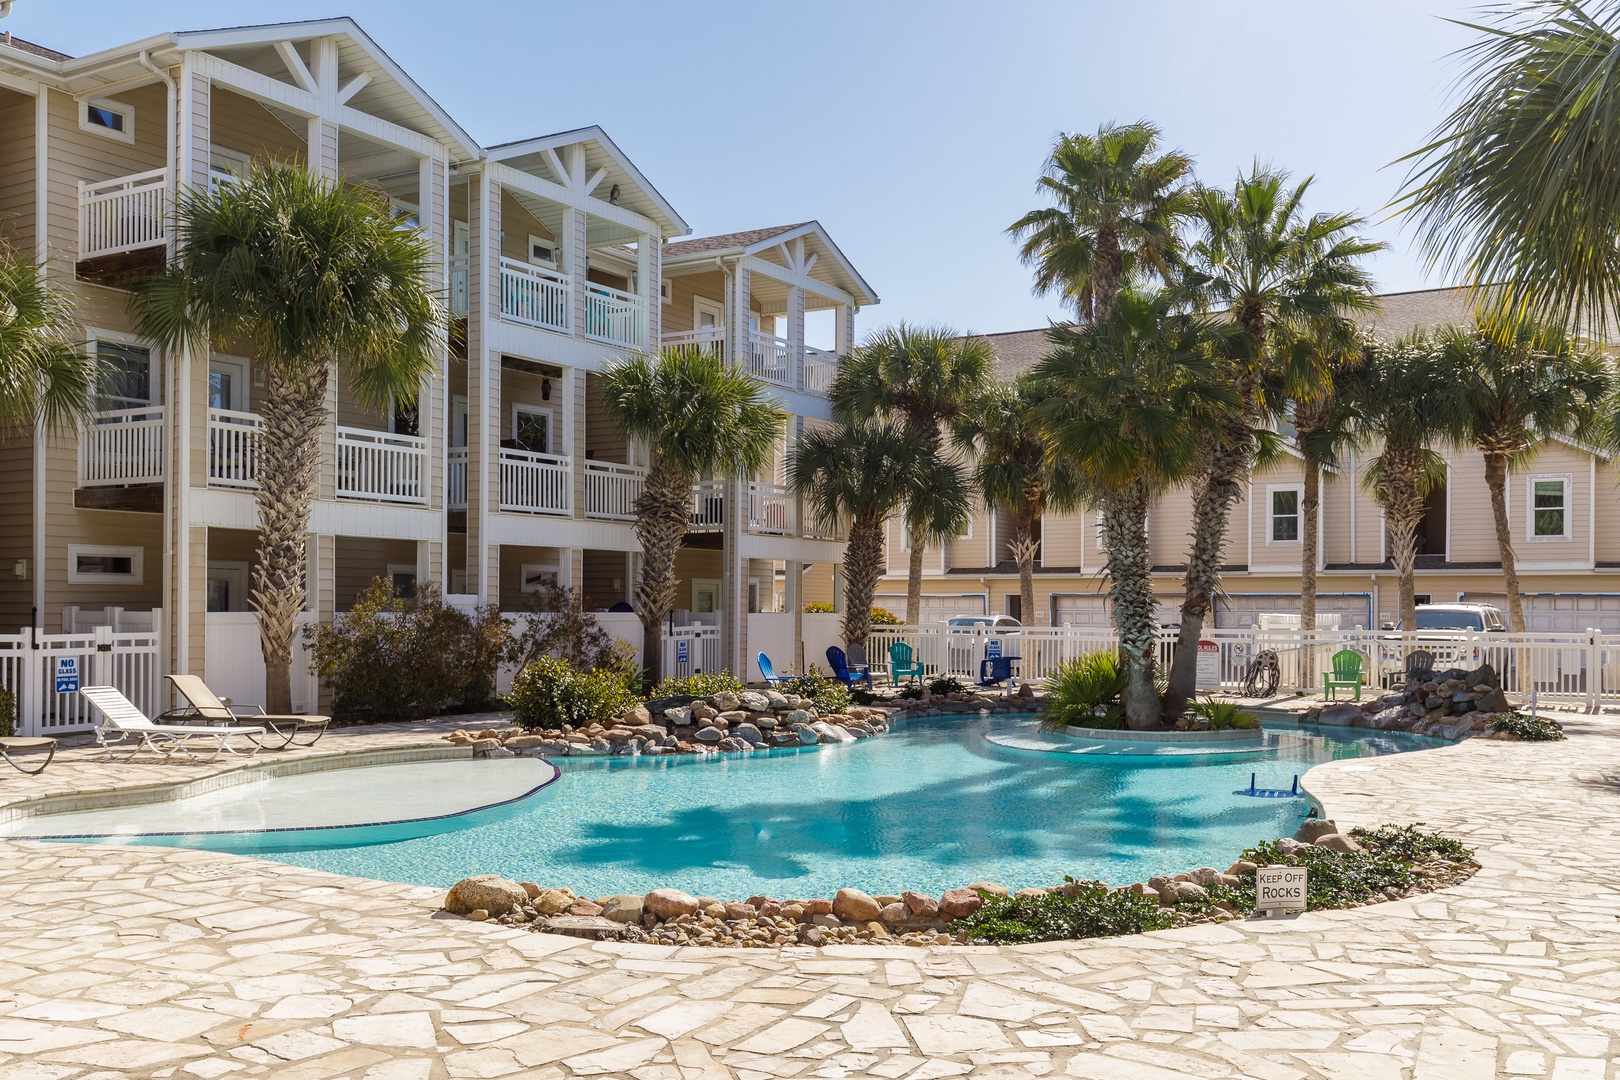 Lounge the day away or make a splash at the sparkling community pool!